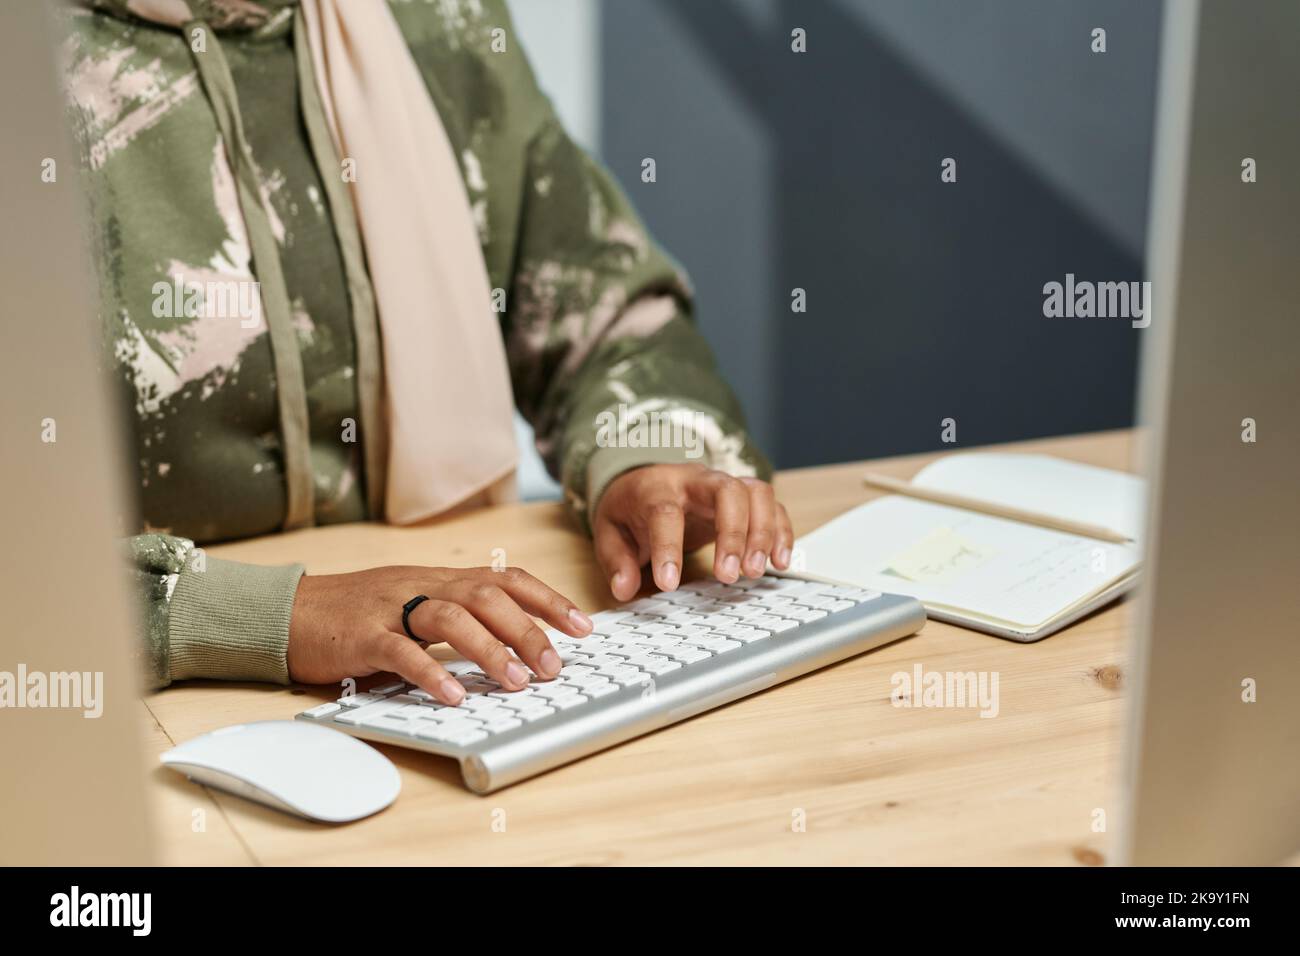 Hands of young Muslim businesswoman in casualwear typing on computer keyboard while developing new software Stock Photo